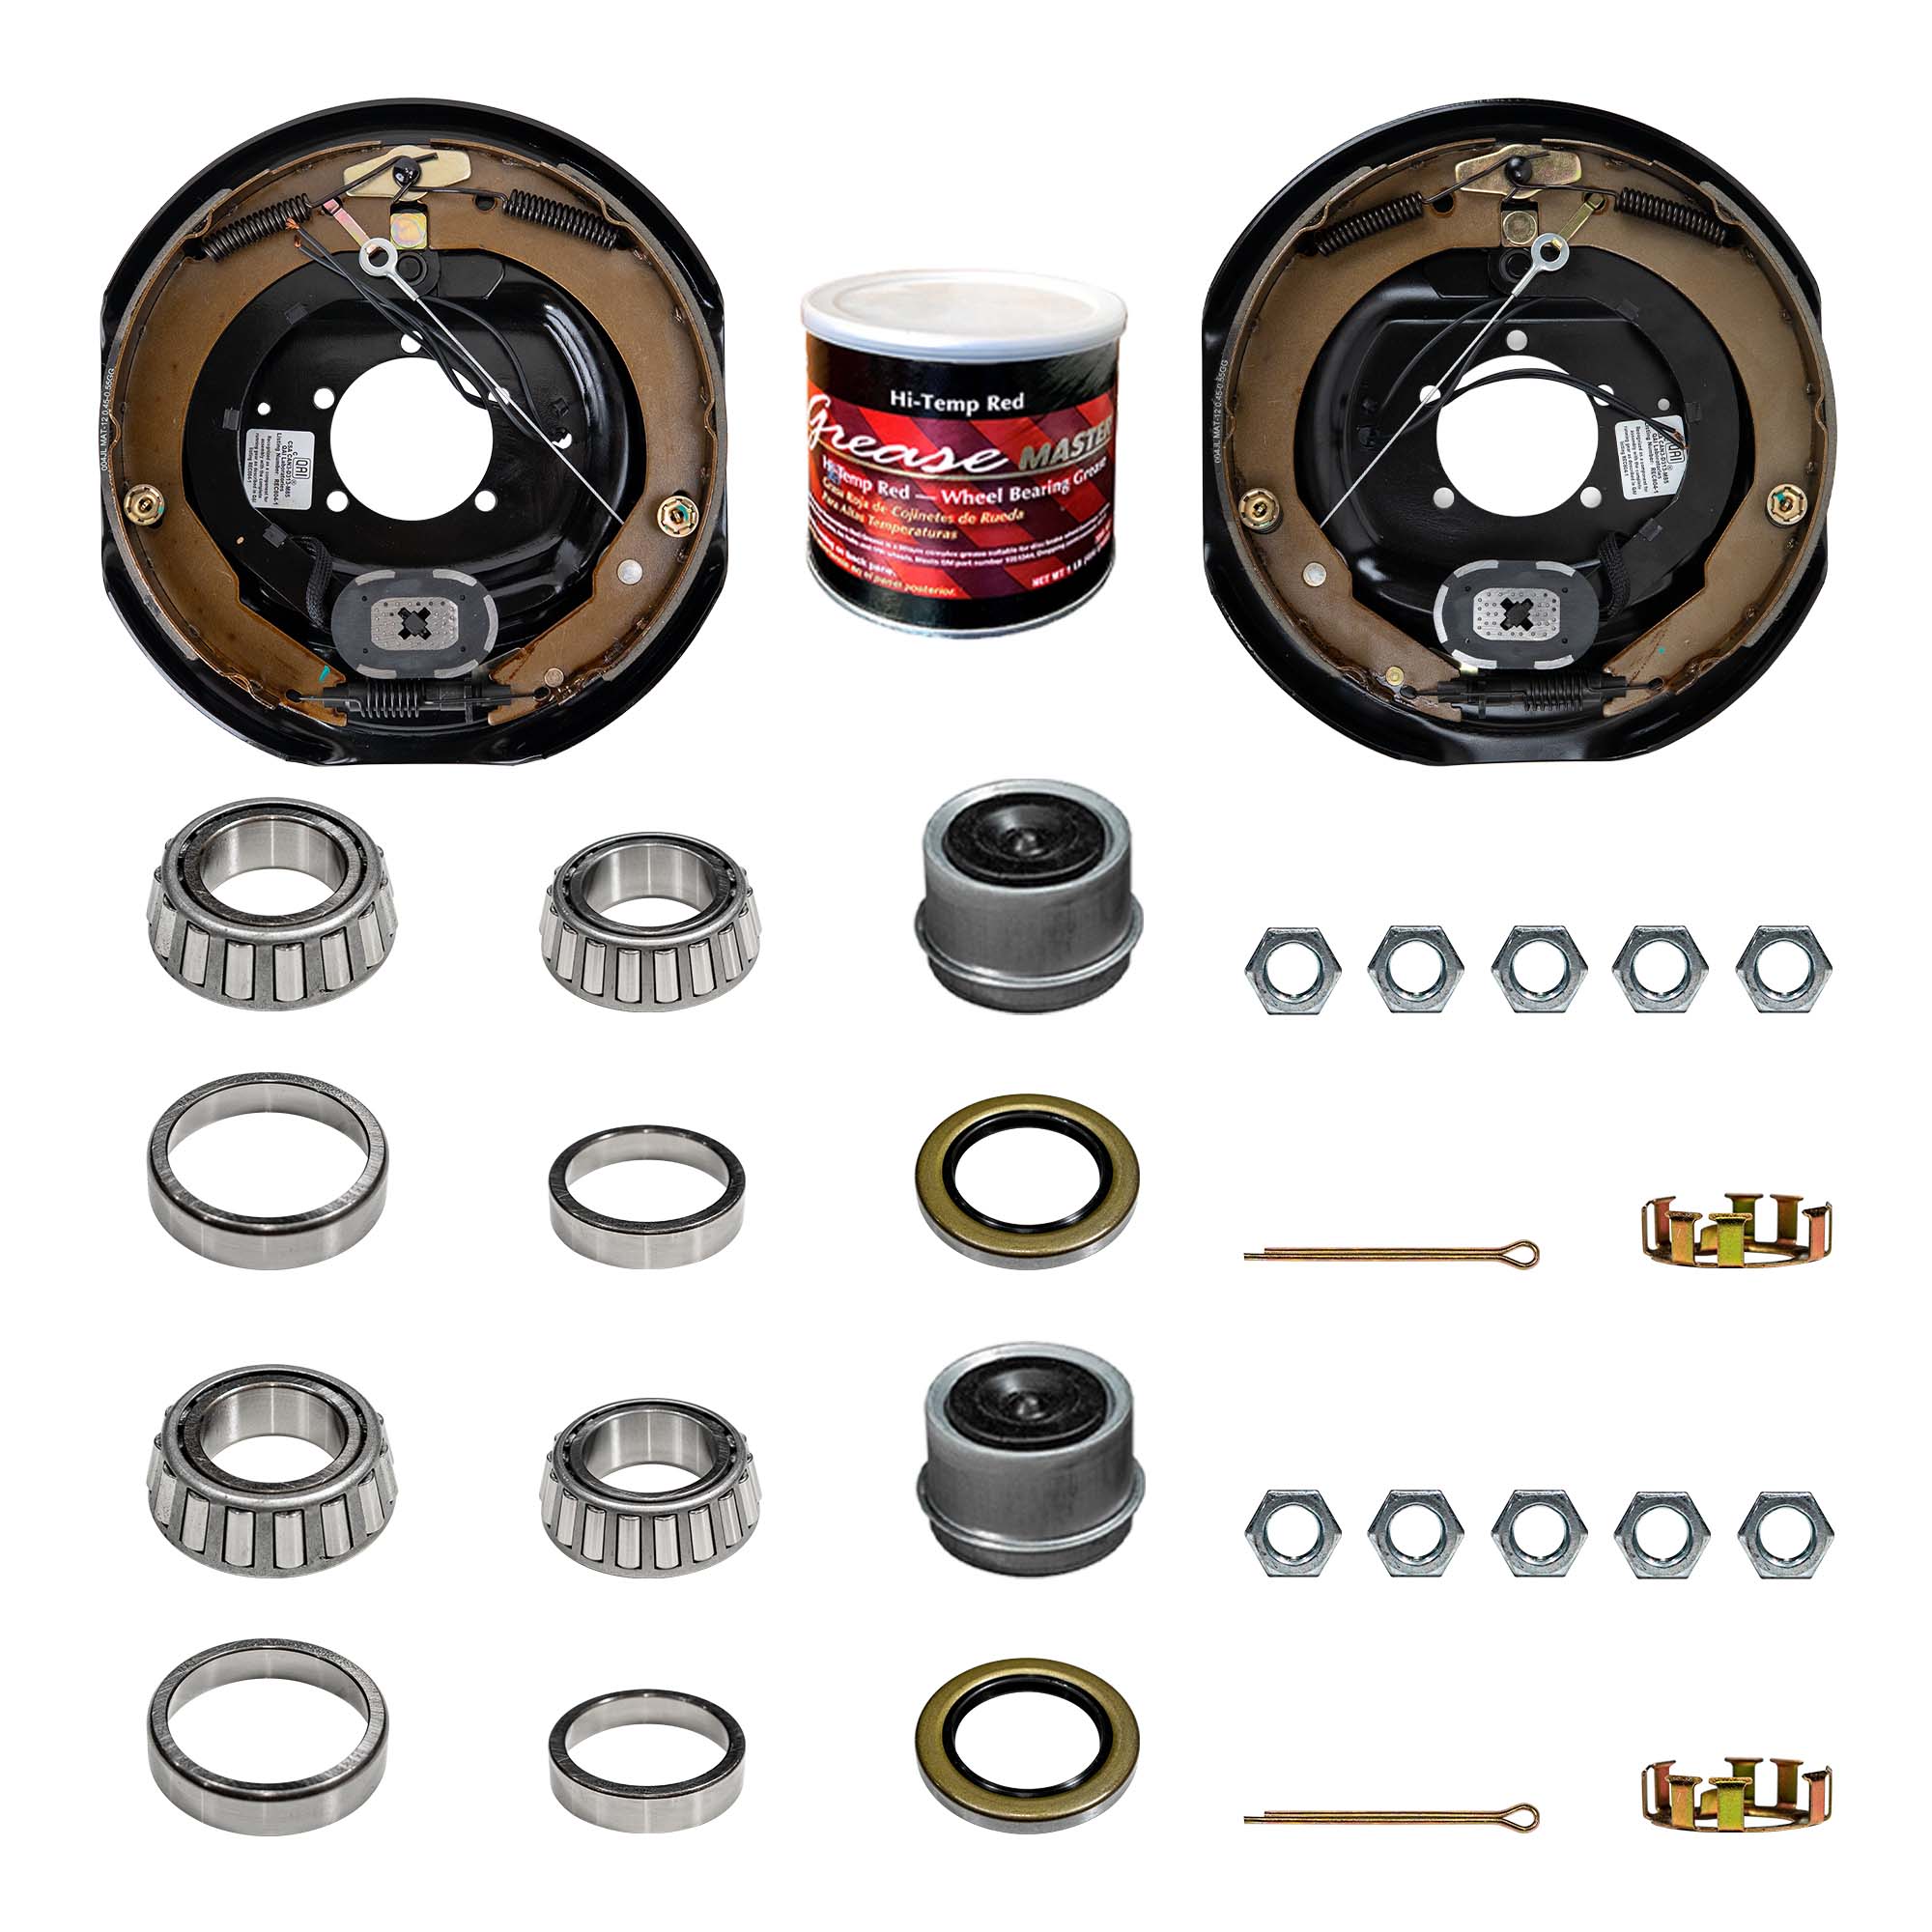 7k Trailer Axle Brake Assembly | Trailer Parts Outlet